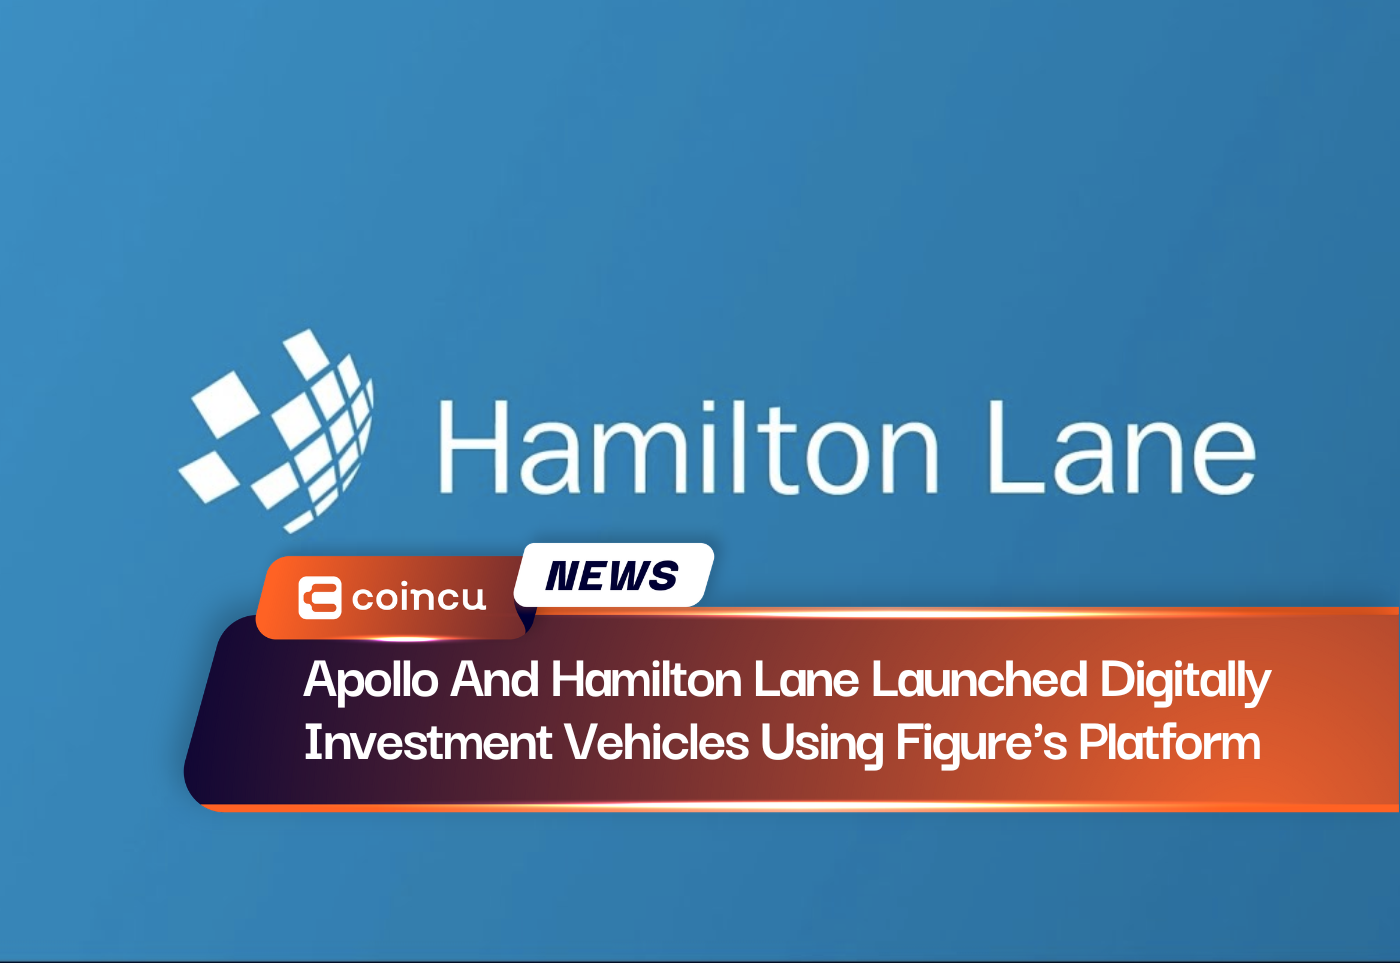 Apollo And Hamilton Lane Launched Digitally Investment Vehicles Using Figure's Platform